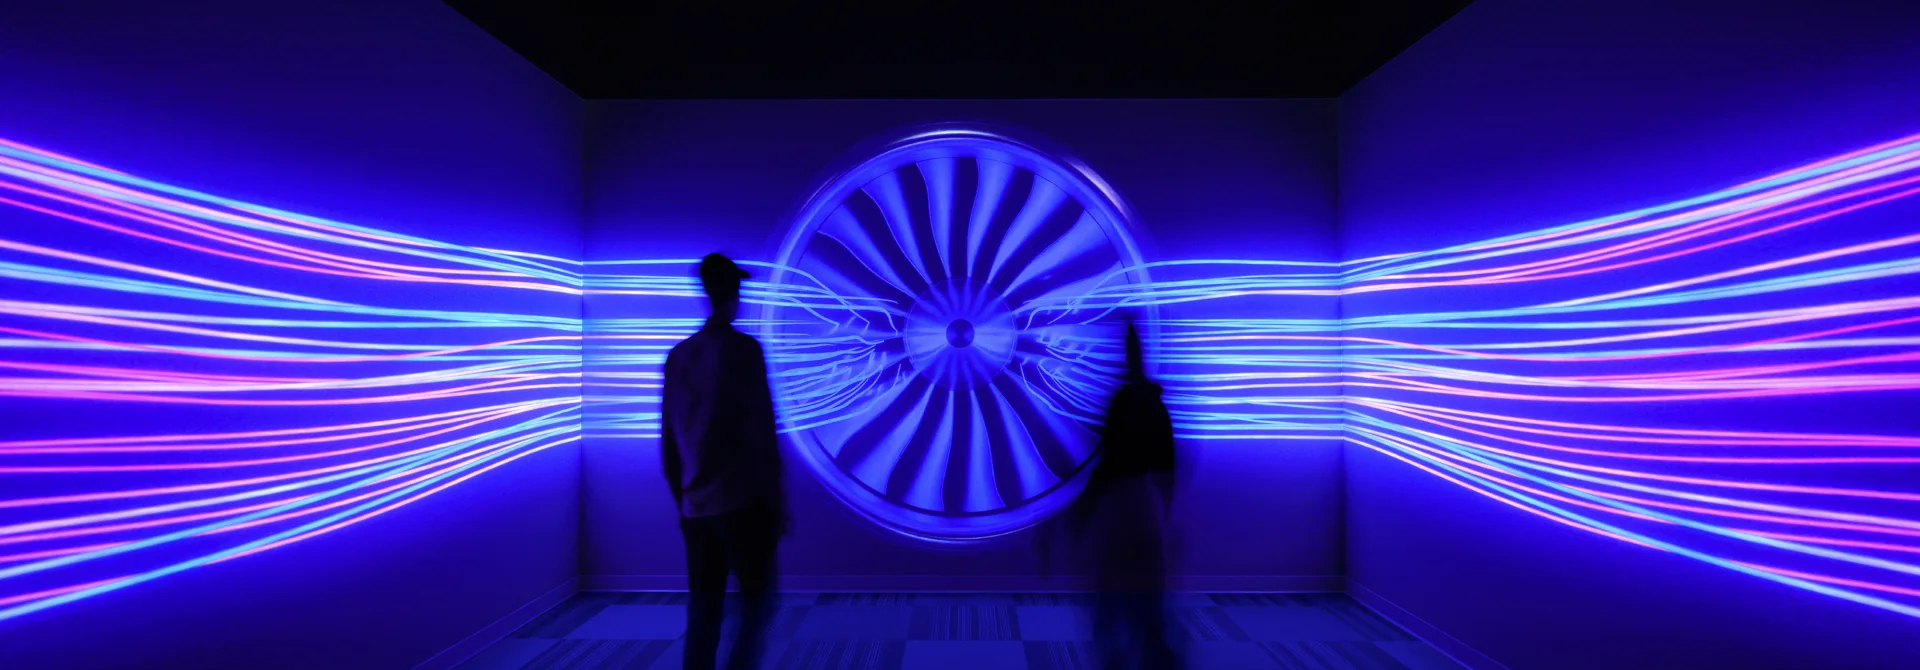 Two people stand in front of a projected airplane engine, with flow patterns extending to either side.